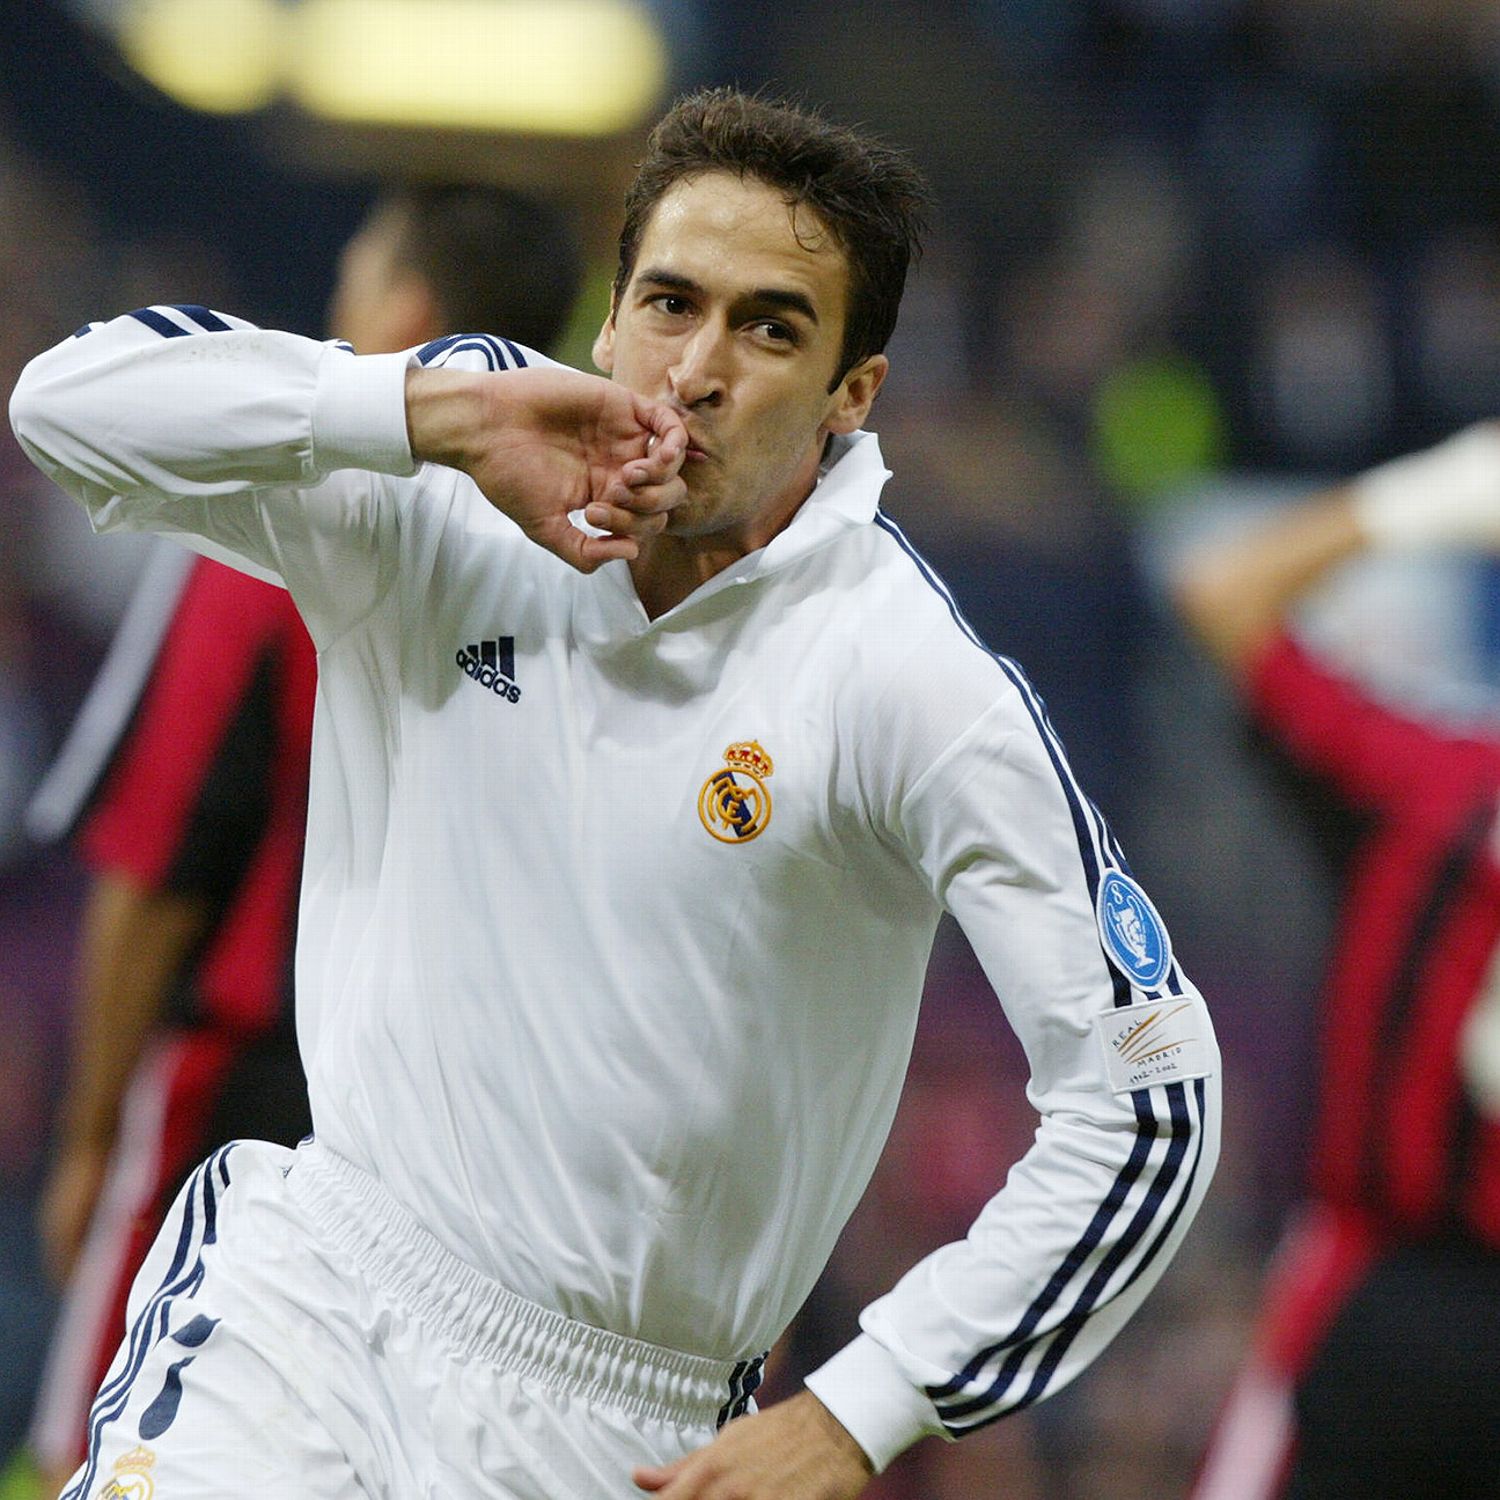 Raul Gonzalez Blanco and his lasting Real Madrid legacy - ESPN FC